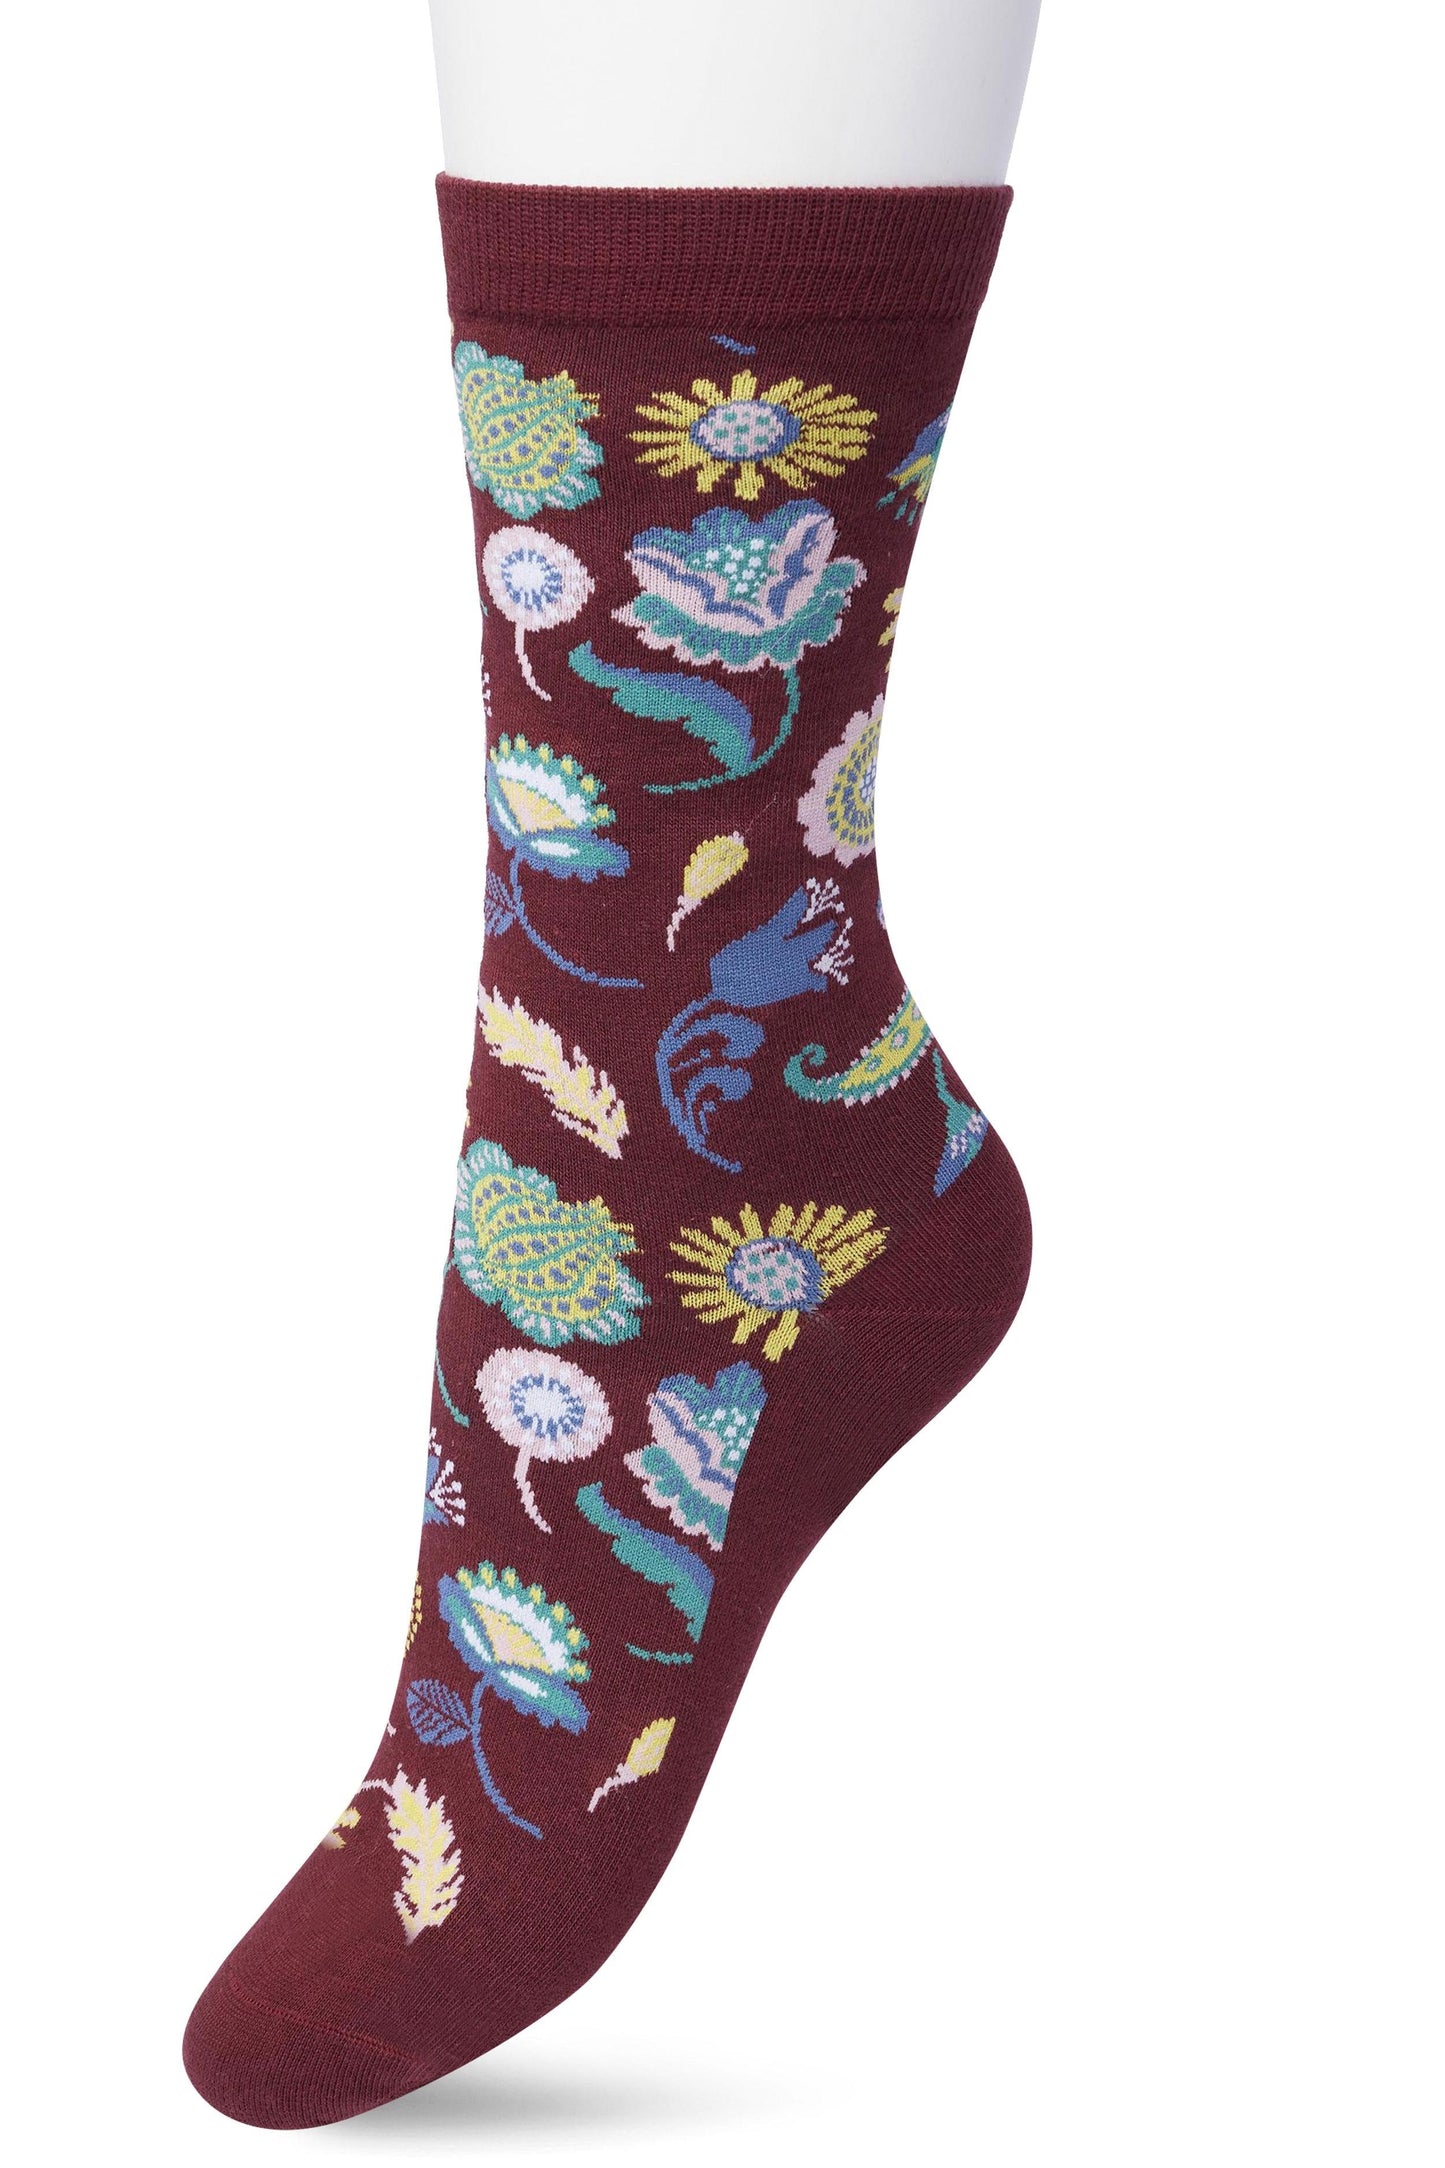 Bonnie Doon BP211121 Flower Fantasy Sock - Wine cotton ankle socks with a woven multicoloured floral pattern.